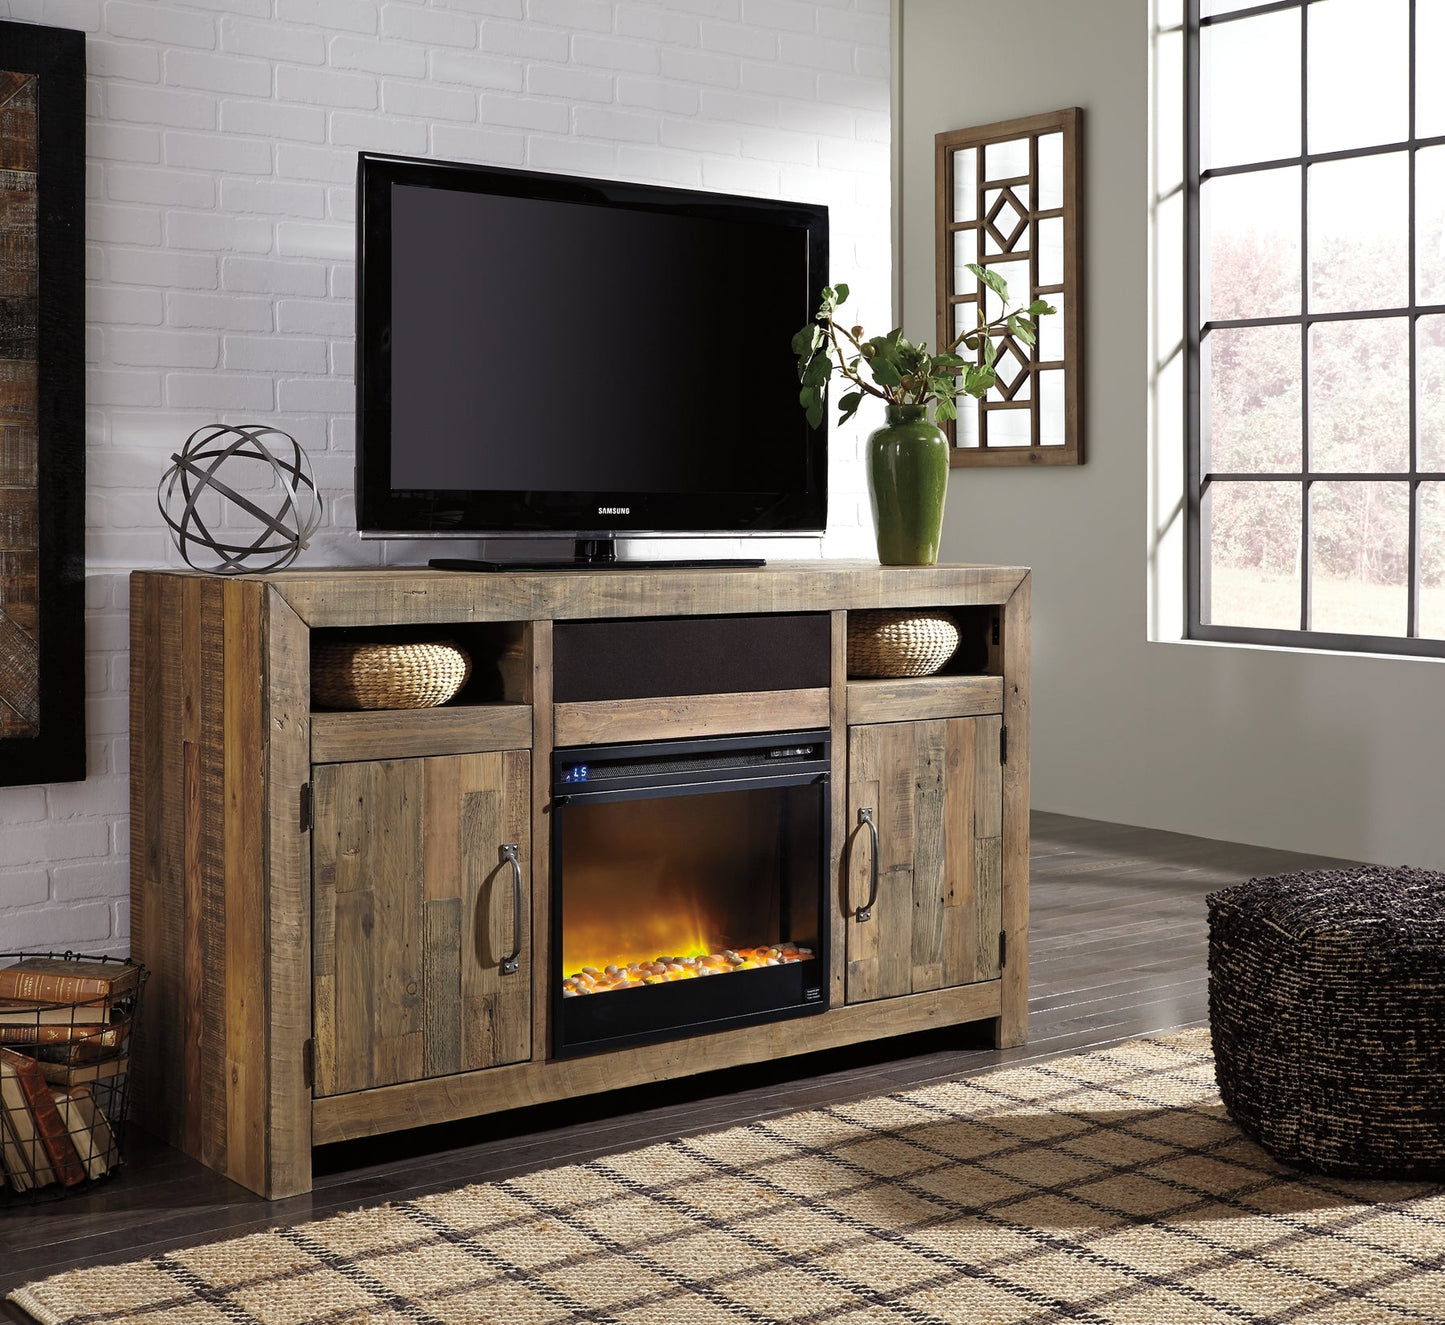 Sommerford LG TV Stand w/Fireplace Option at Walker Mattress and Furniture Locations in Cedar Park and Belton TX.